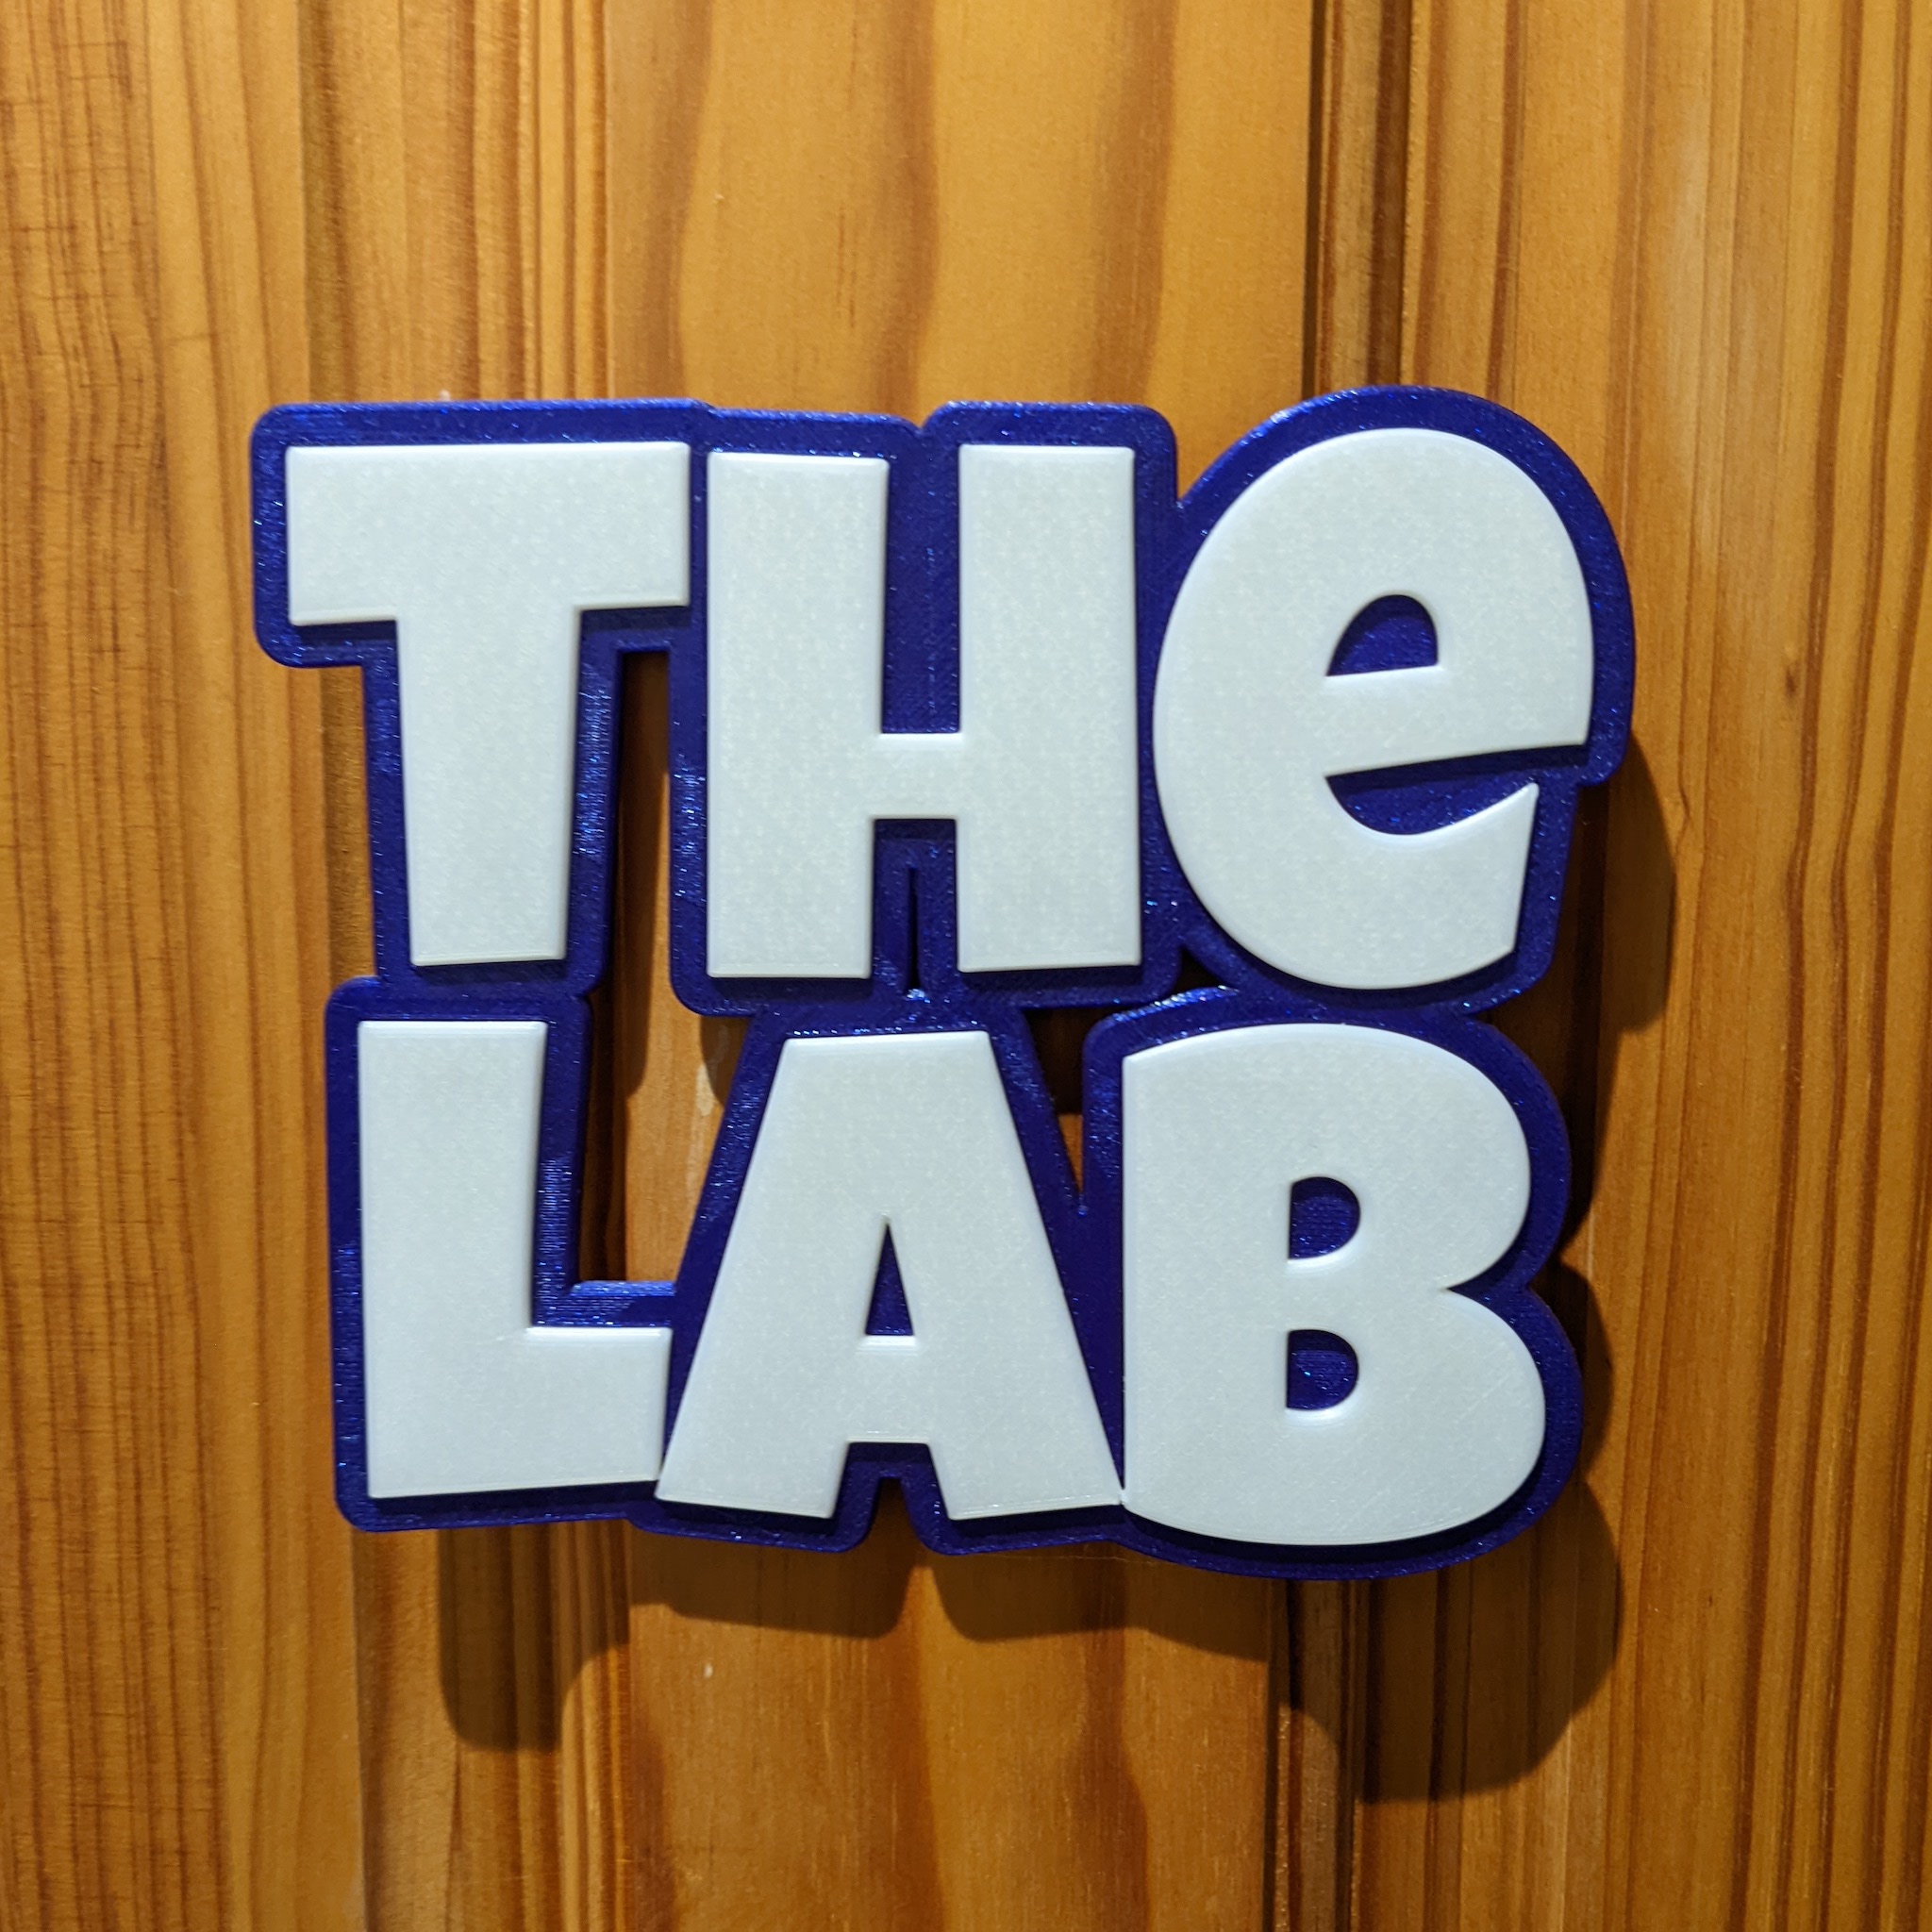 Door name tag - The Lab